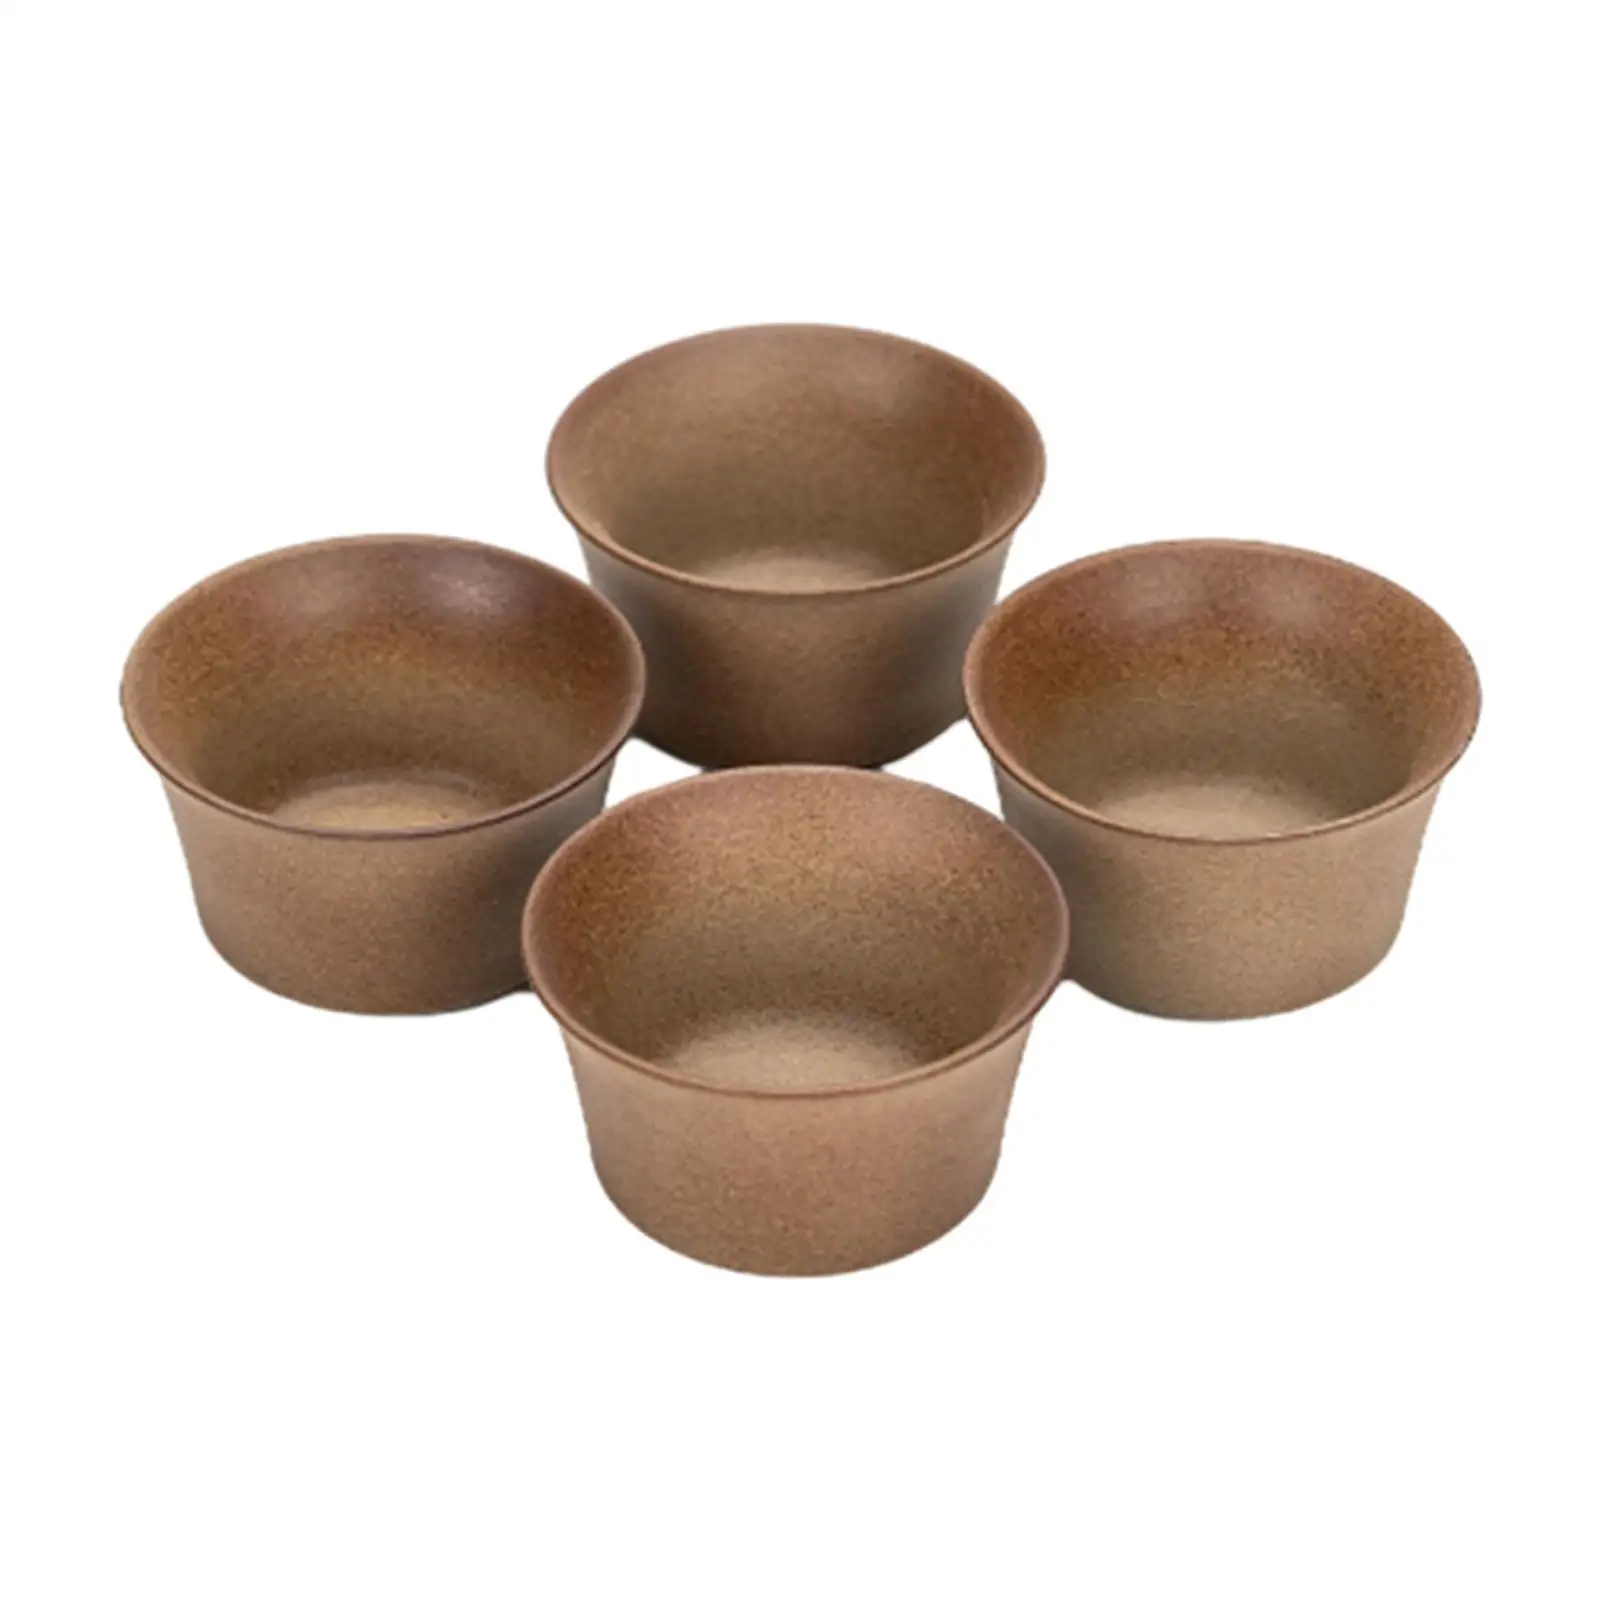 4 Pieces Ceramic Teacup Set Exquisite Kung Fu Tea Cup Handleless Coffee Cup for Cafe Travel Tea Ceremony Party Latte Cappuccino